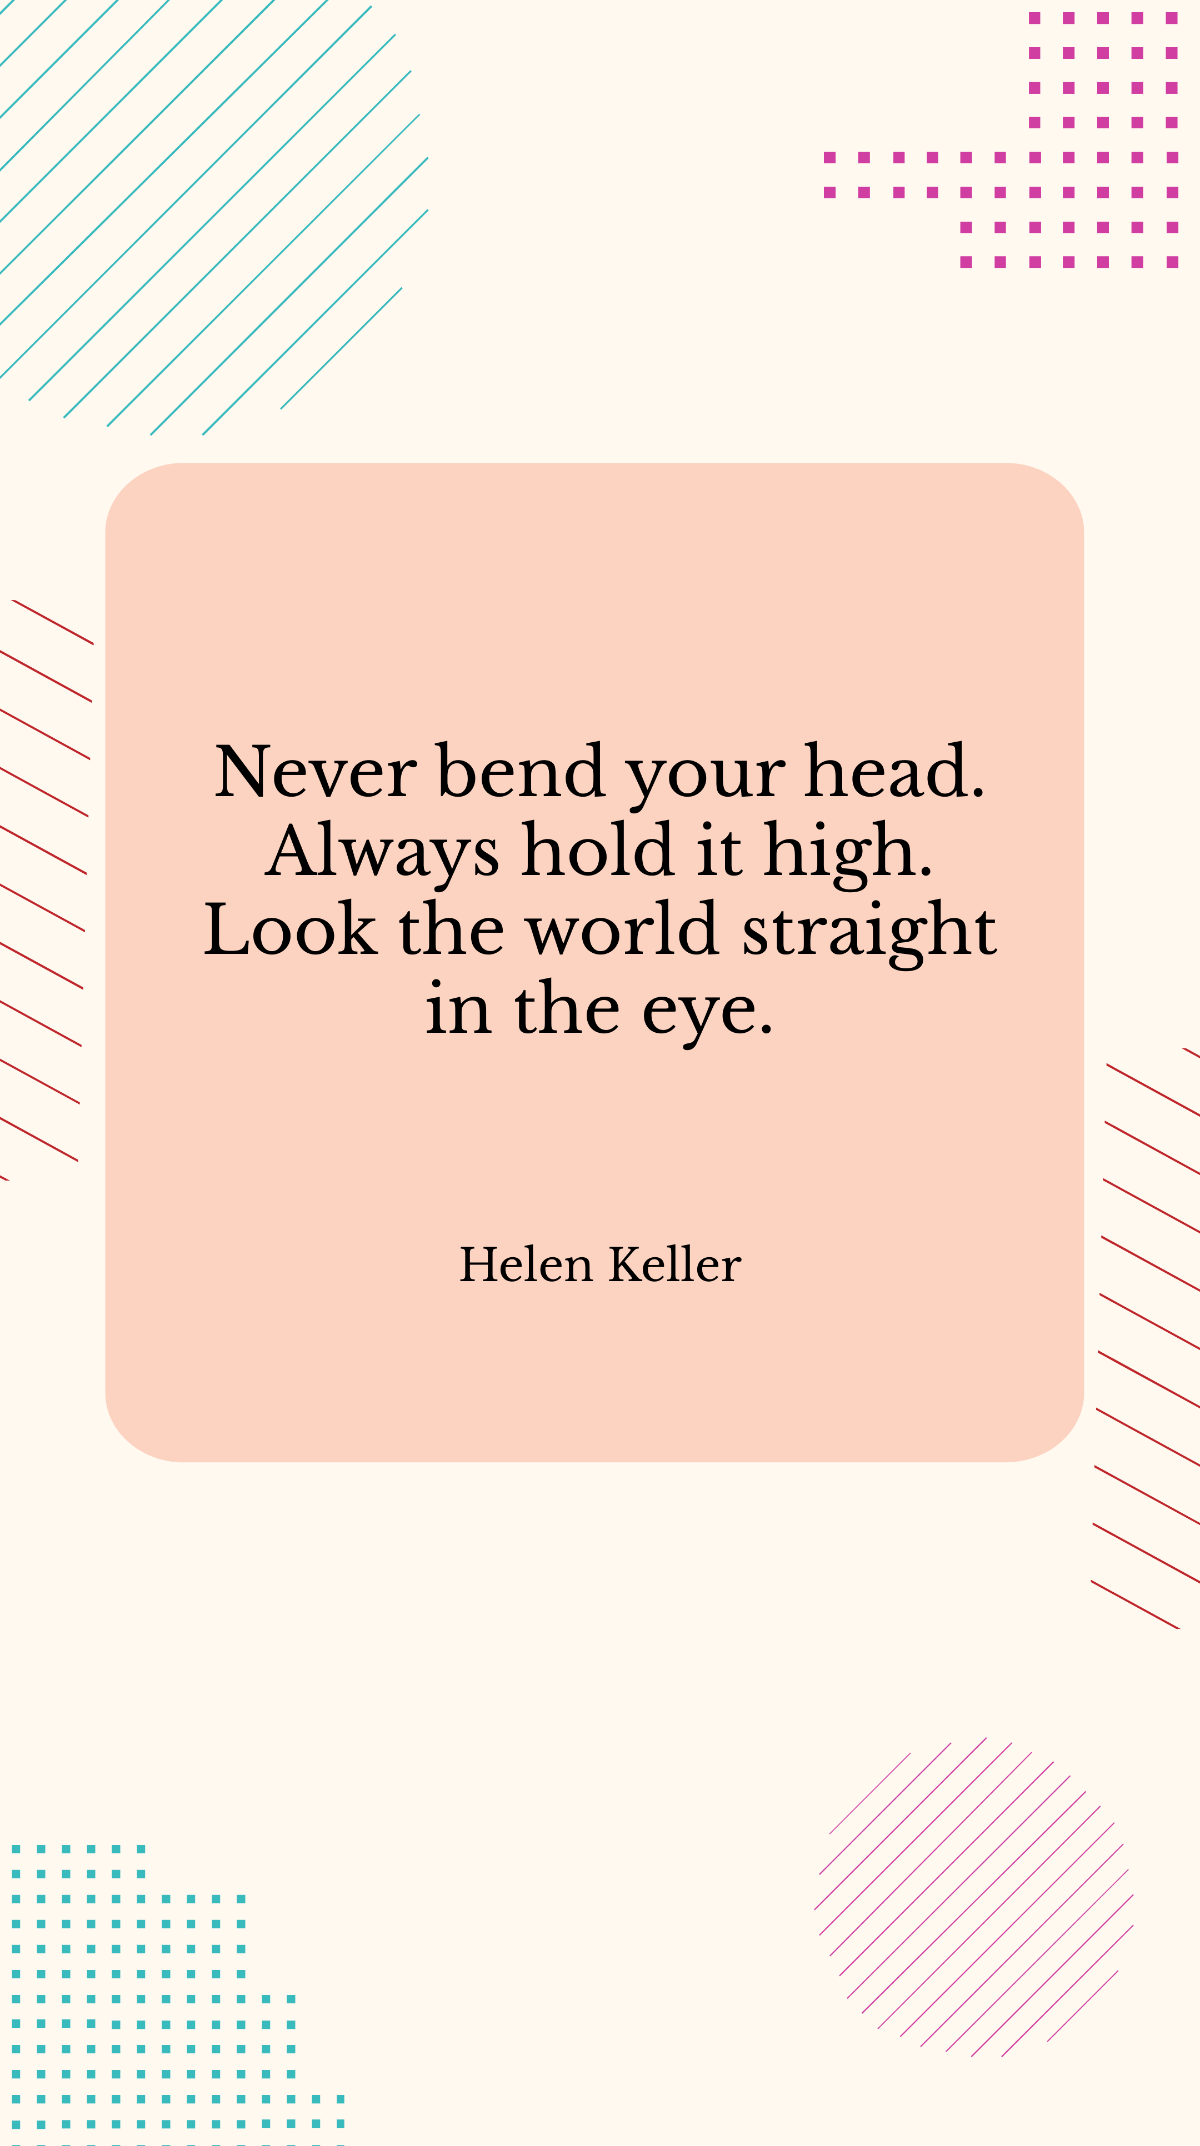 Helen Keller - Never bend your head. Always hold it high. Look the world straight in the eye Template